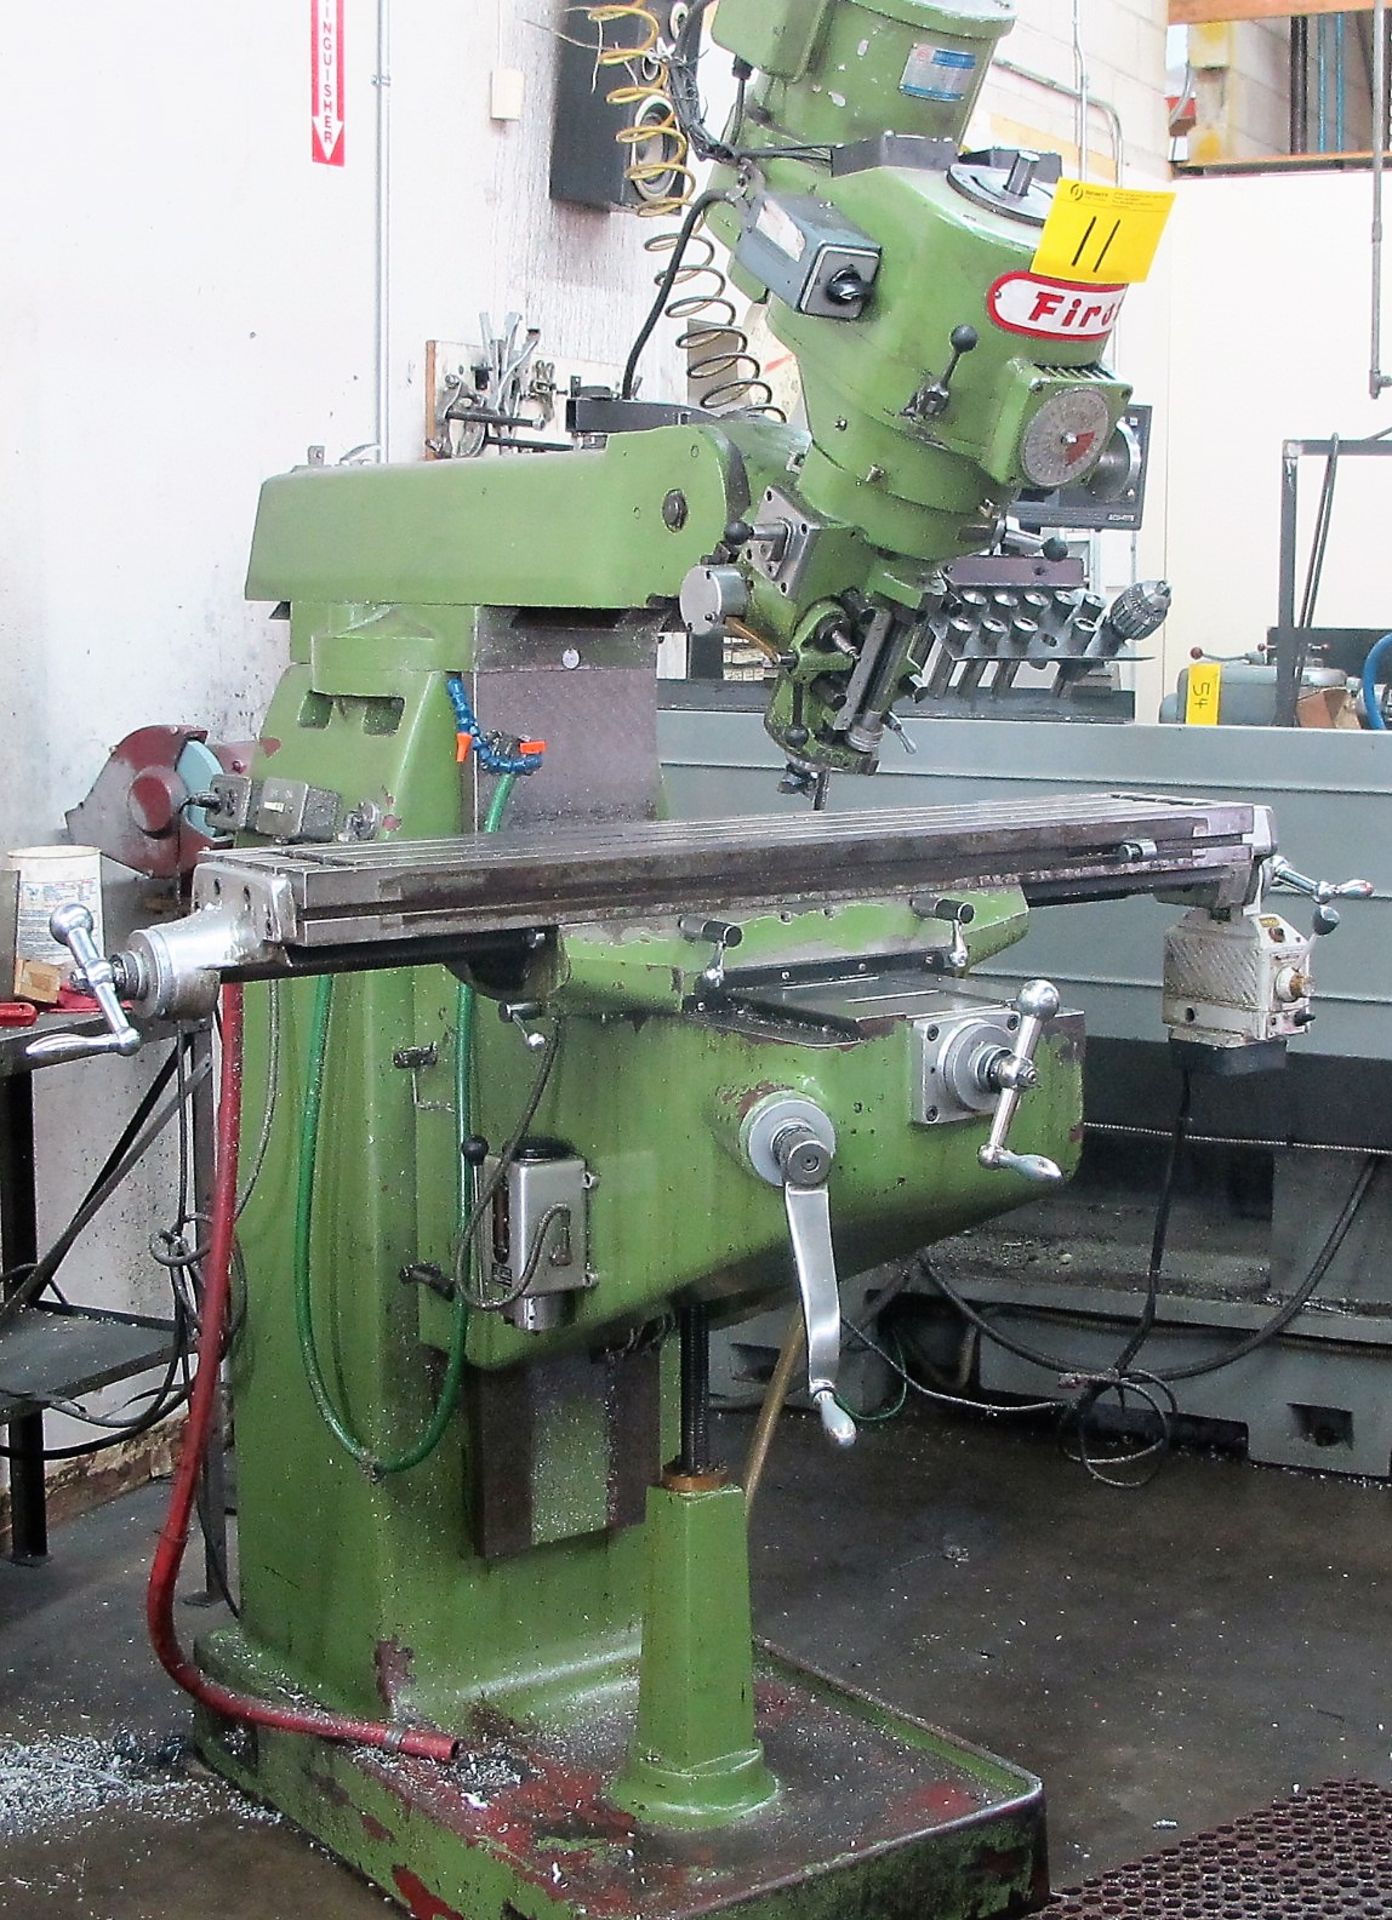 FIRST MILLING MACHINE LC-18VA VERTICAL MILLING MACHINE, ACU-RITE 2 AXIS DRO, 9" X 49" TABLE, ALIGN